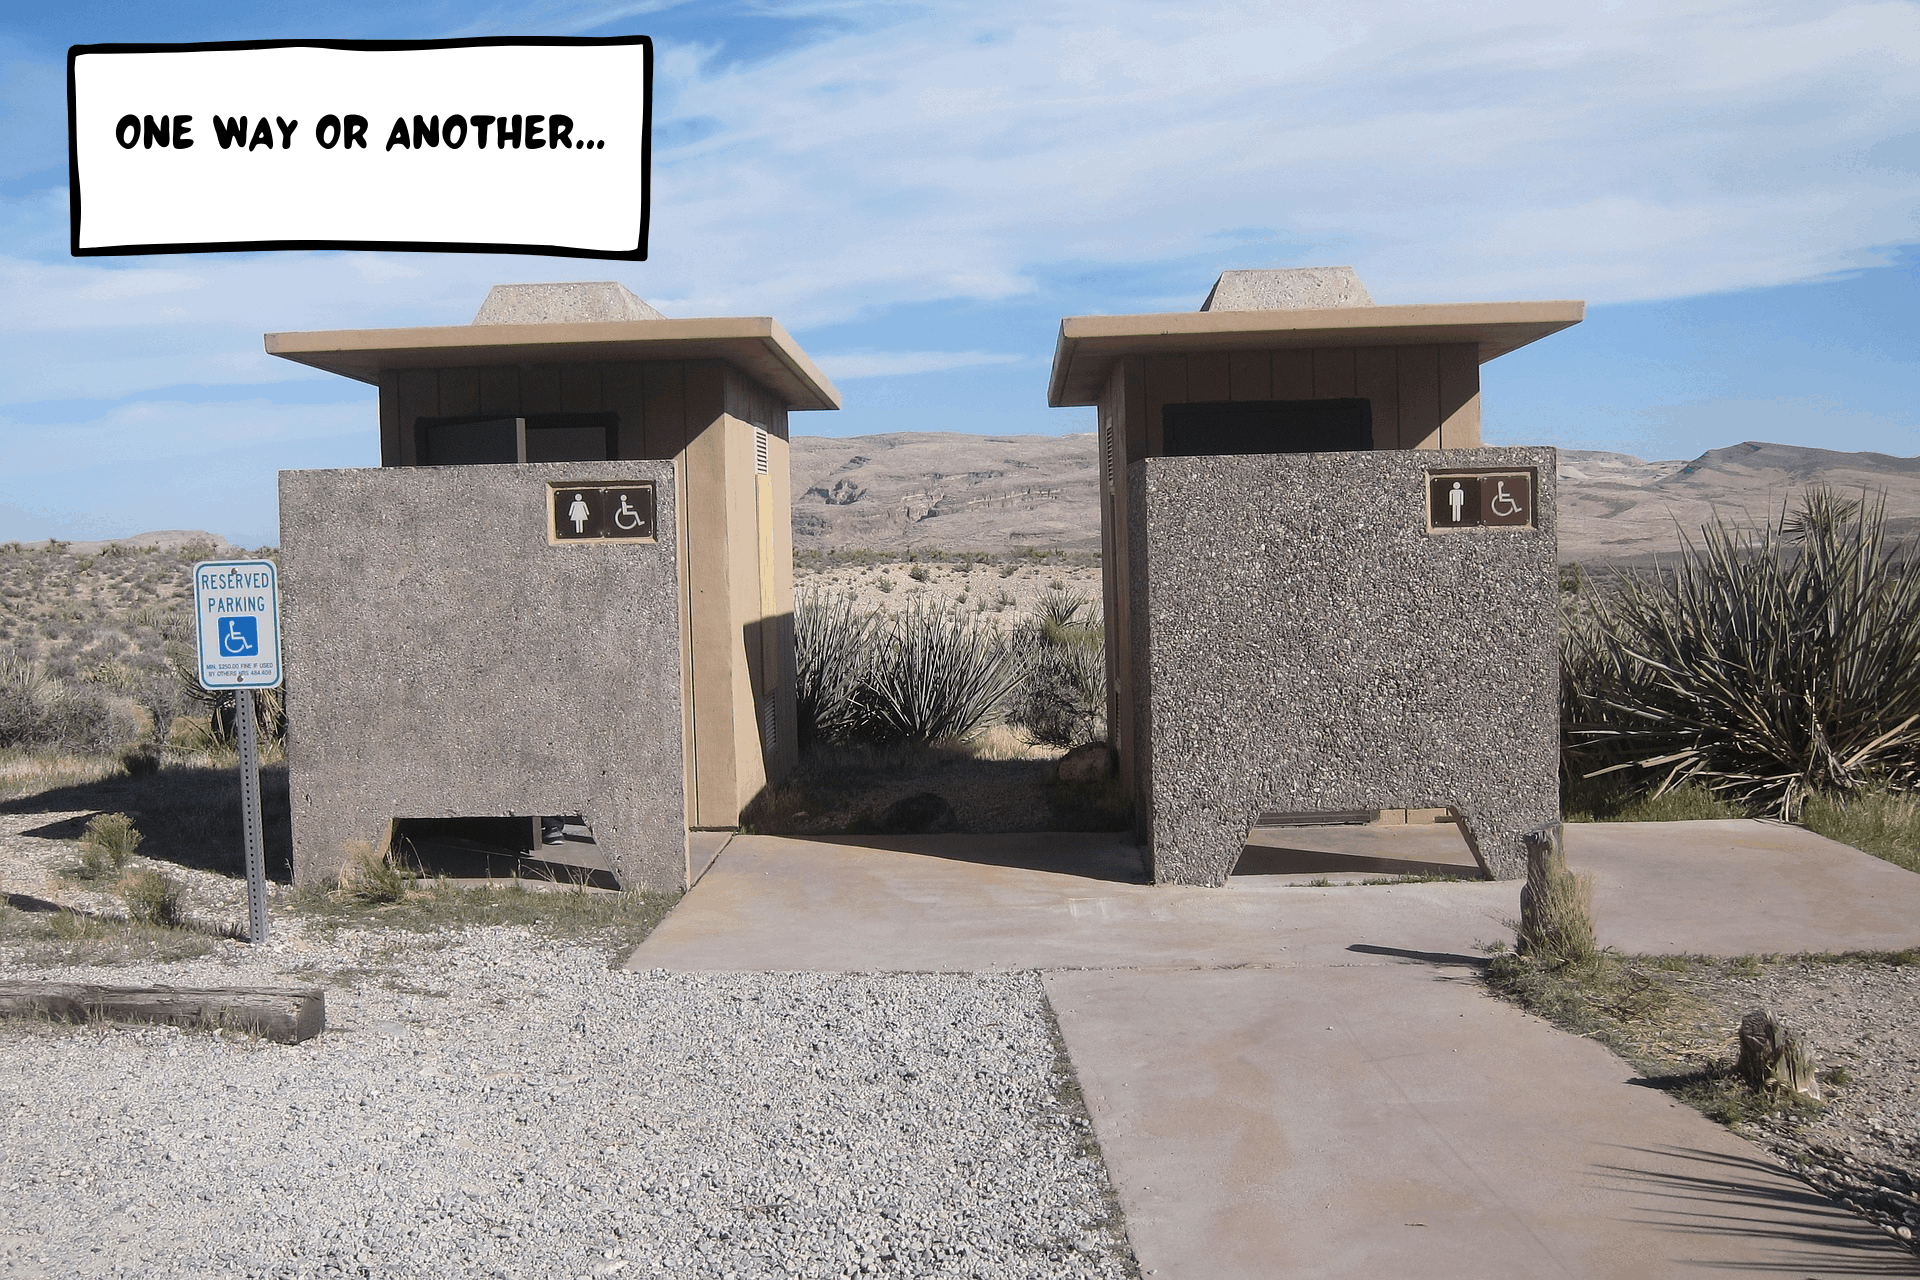 Image by pinkzebra from Pixabay. Two toilet/bathroom outhouses in the desert. The outhouses and the surrounding desert are of a light tan color. Blue sky with light flat clouds. A comic bubble caption box says "One way or another..."